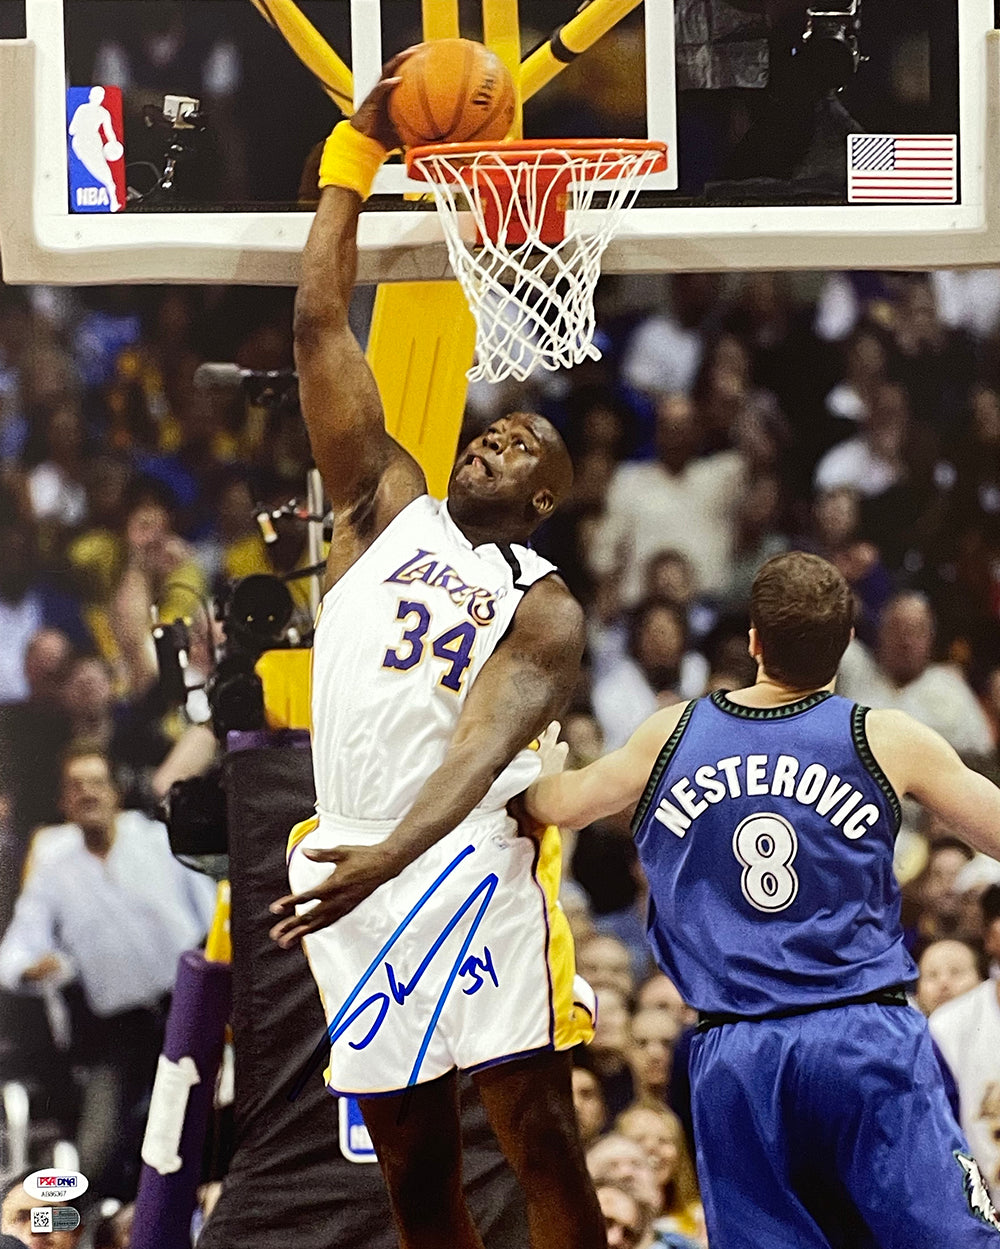 Shaquille O'Neal Los Angeles Lakers Slam Dunk in Yellow